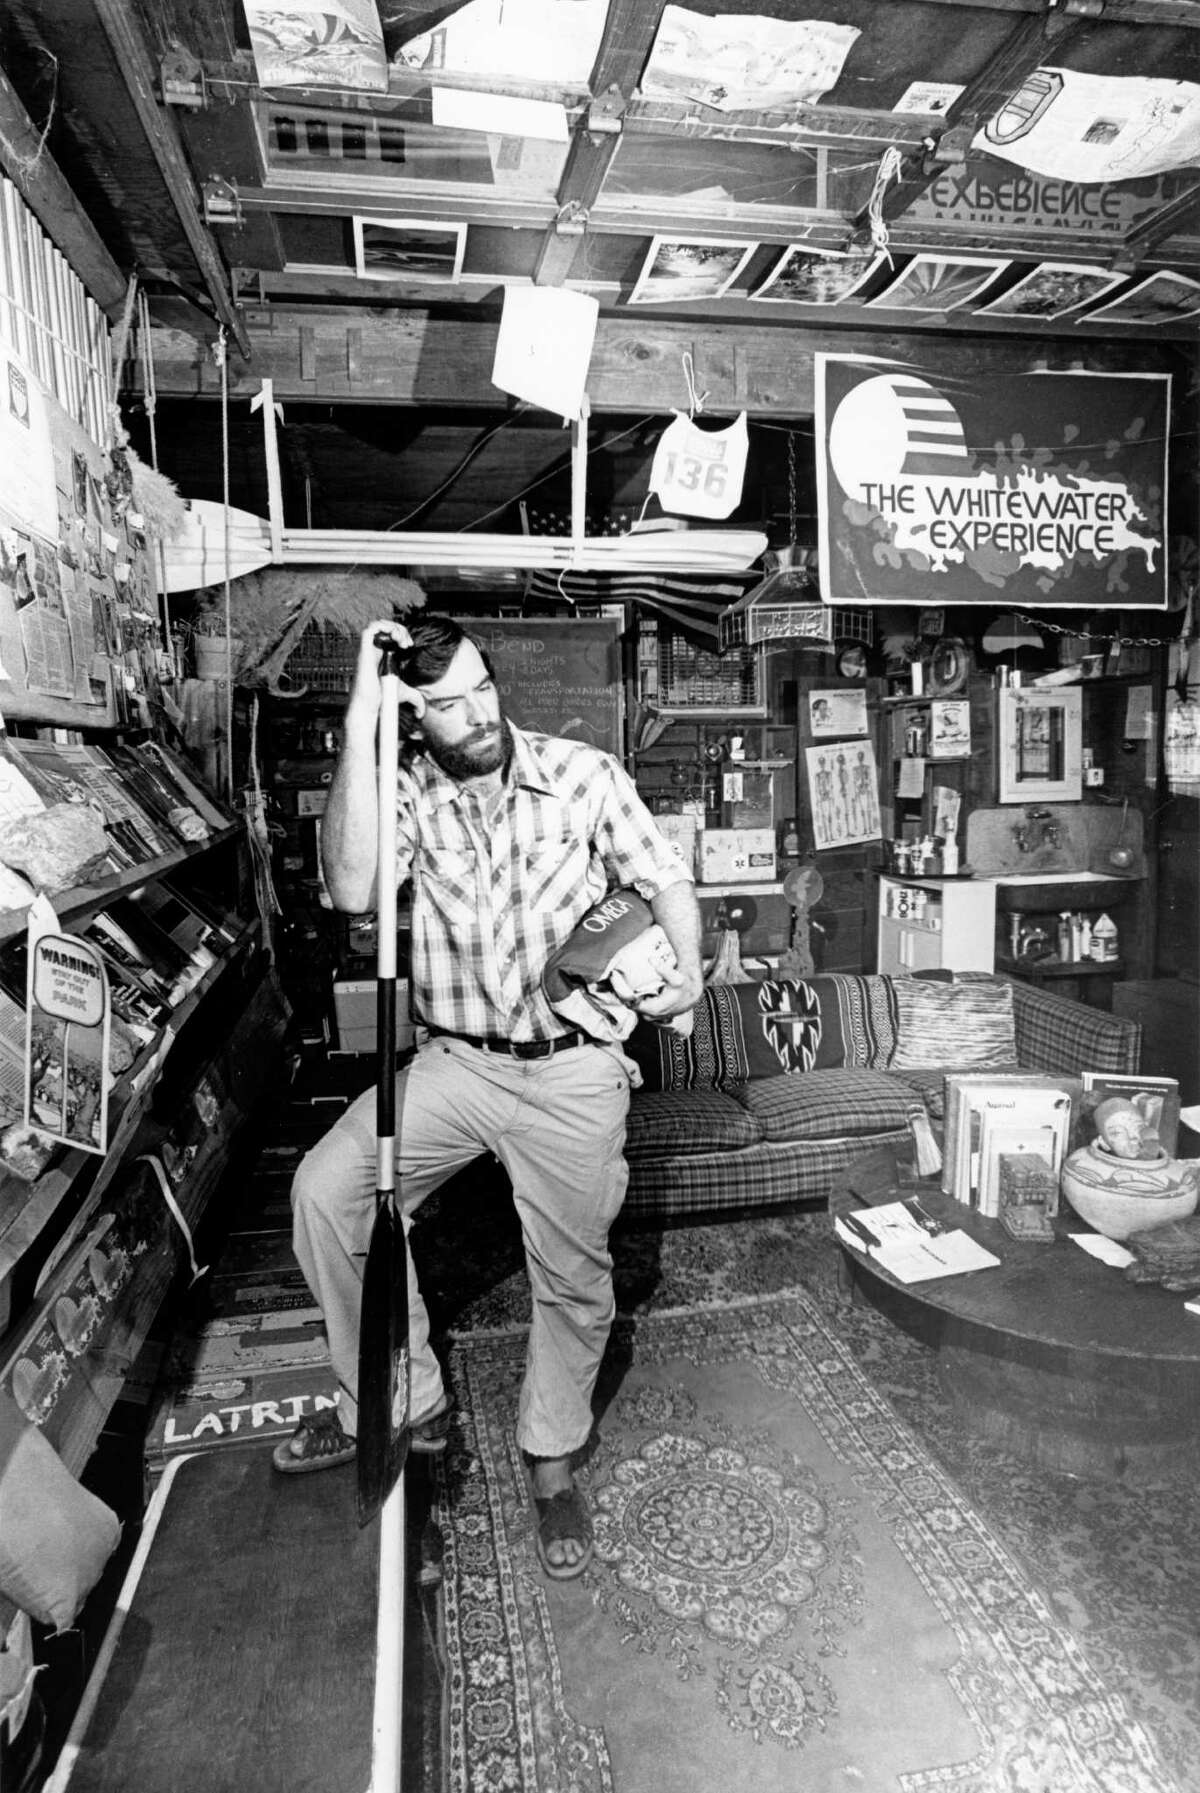 07/17/1980 - Whitewater guide and outfitter Don Greene in his shop.